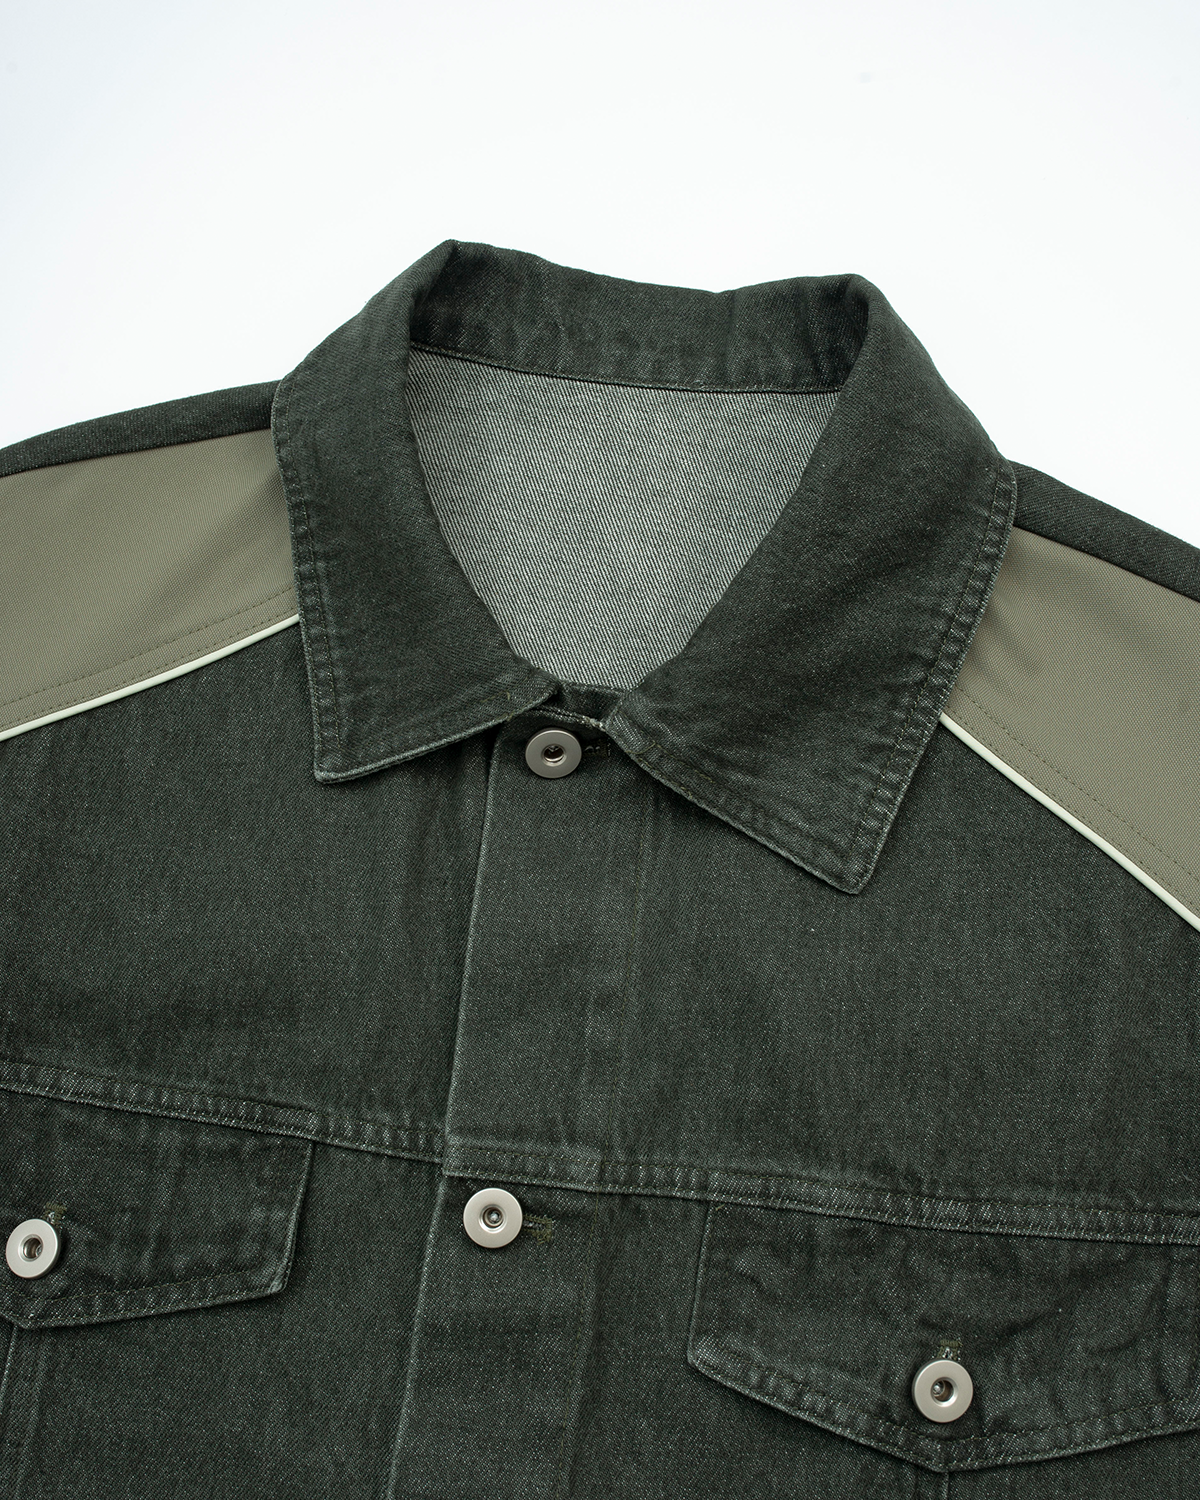 Off The Label two-tone denim jacket green